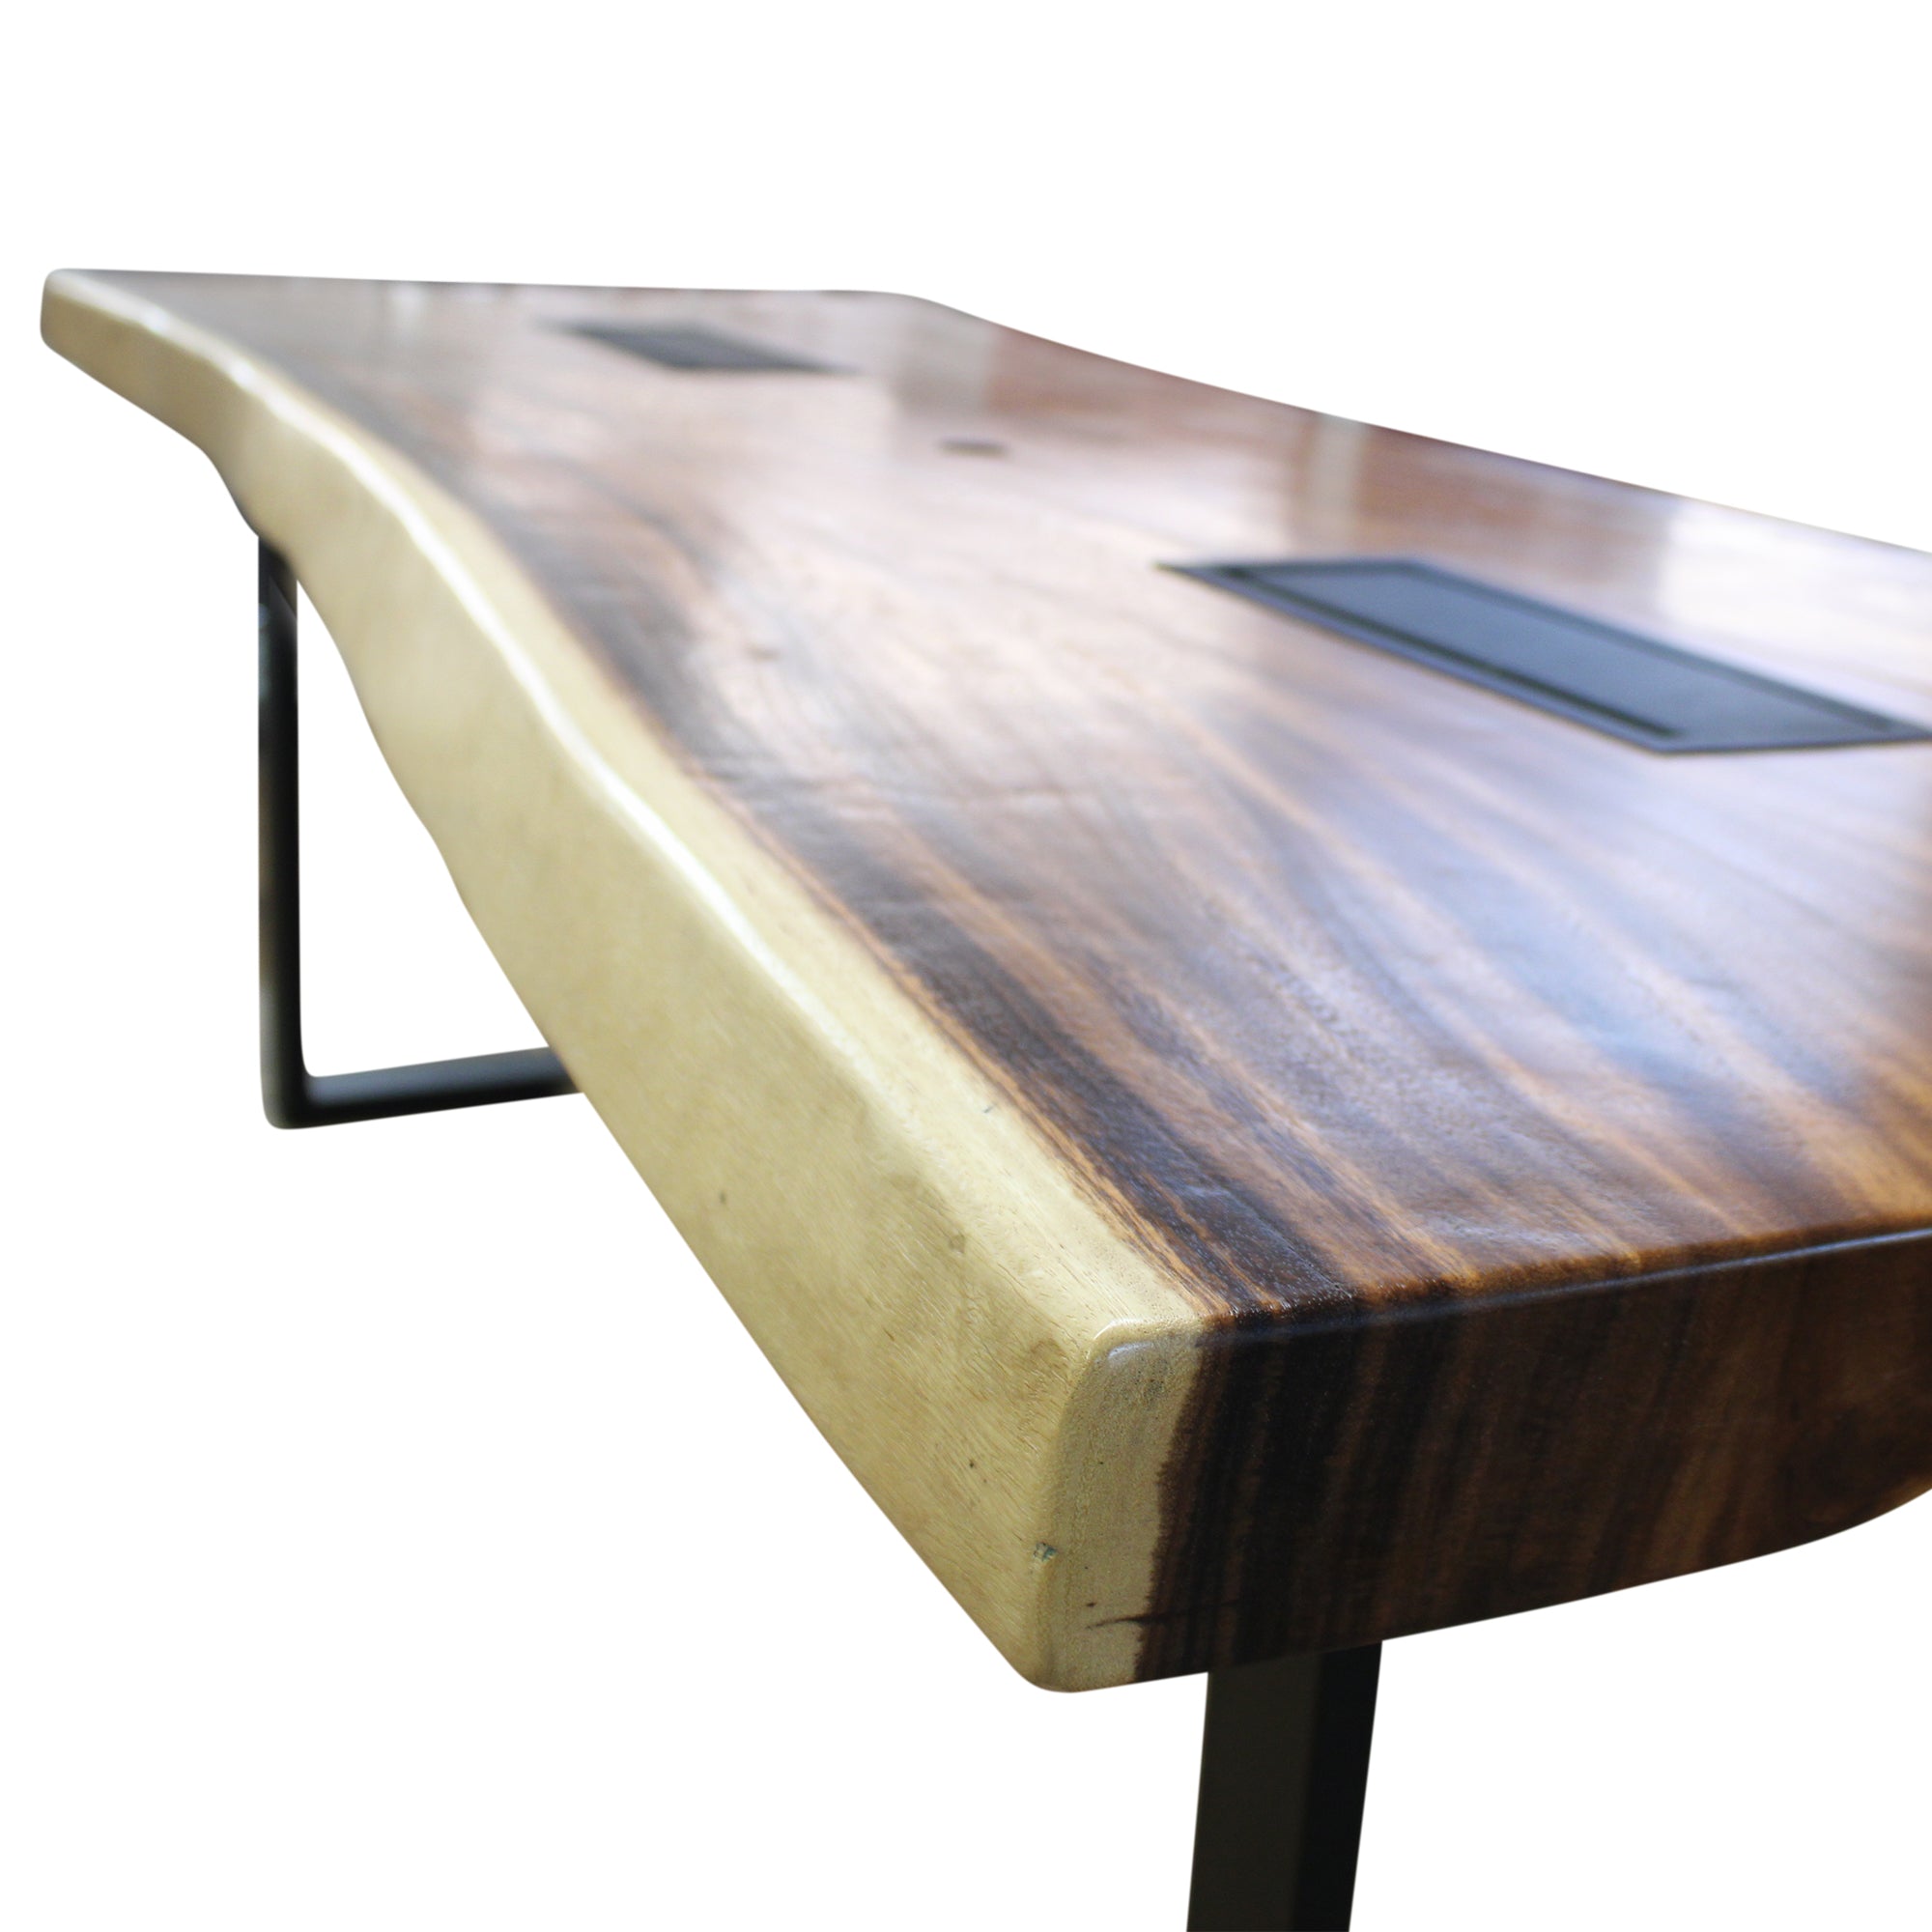 Darran Grove Live Edge Conference Table - Preowned